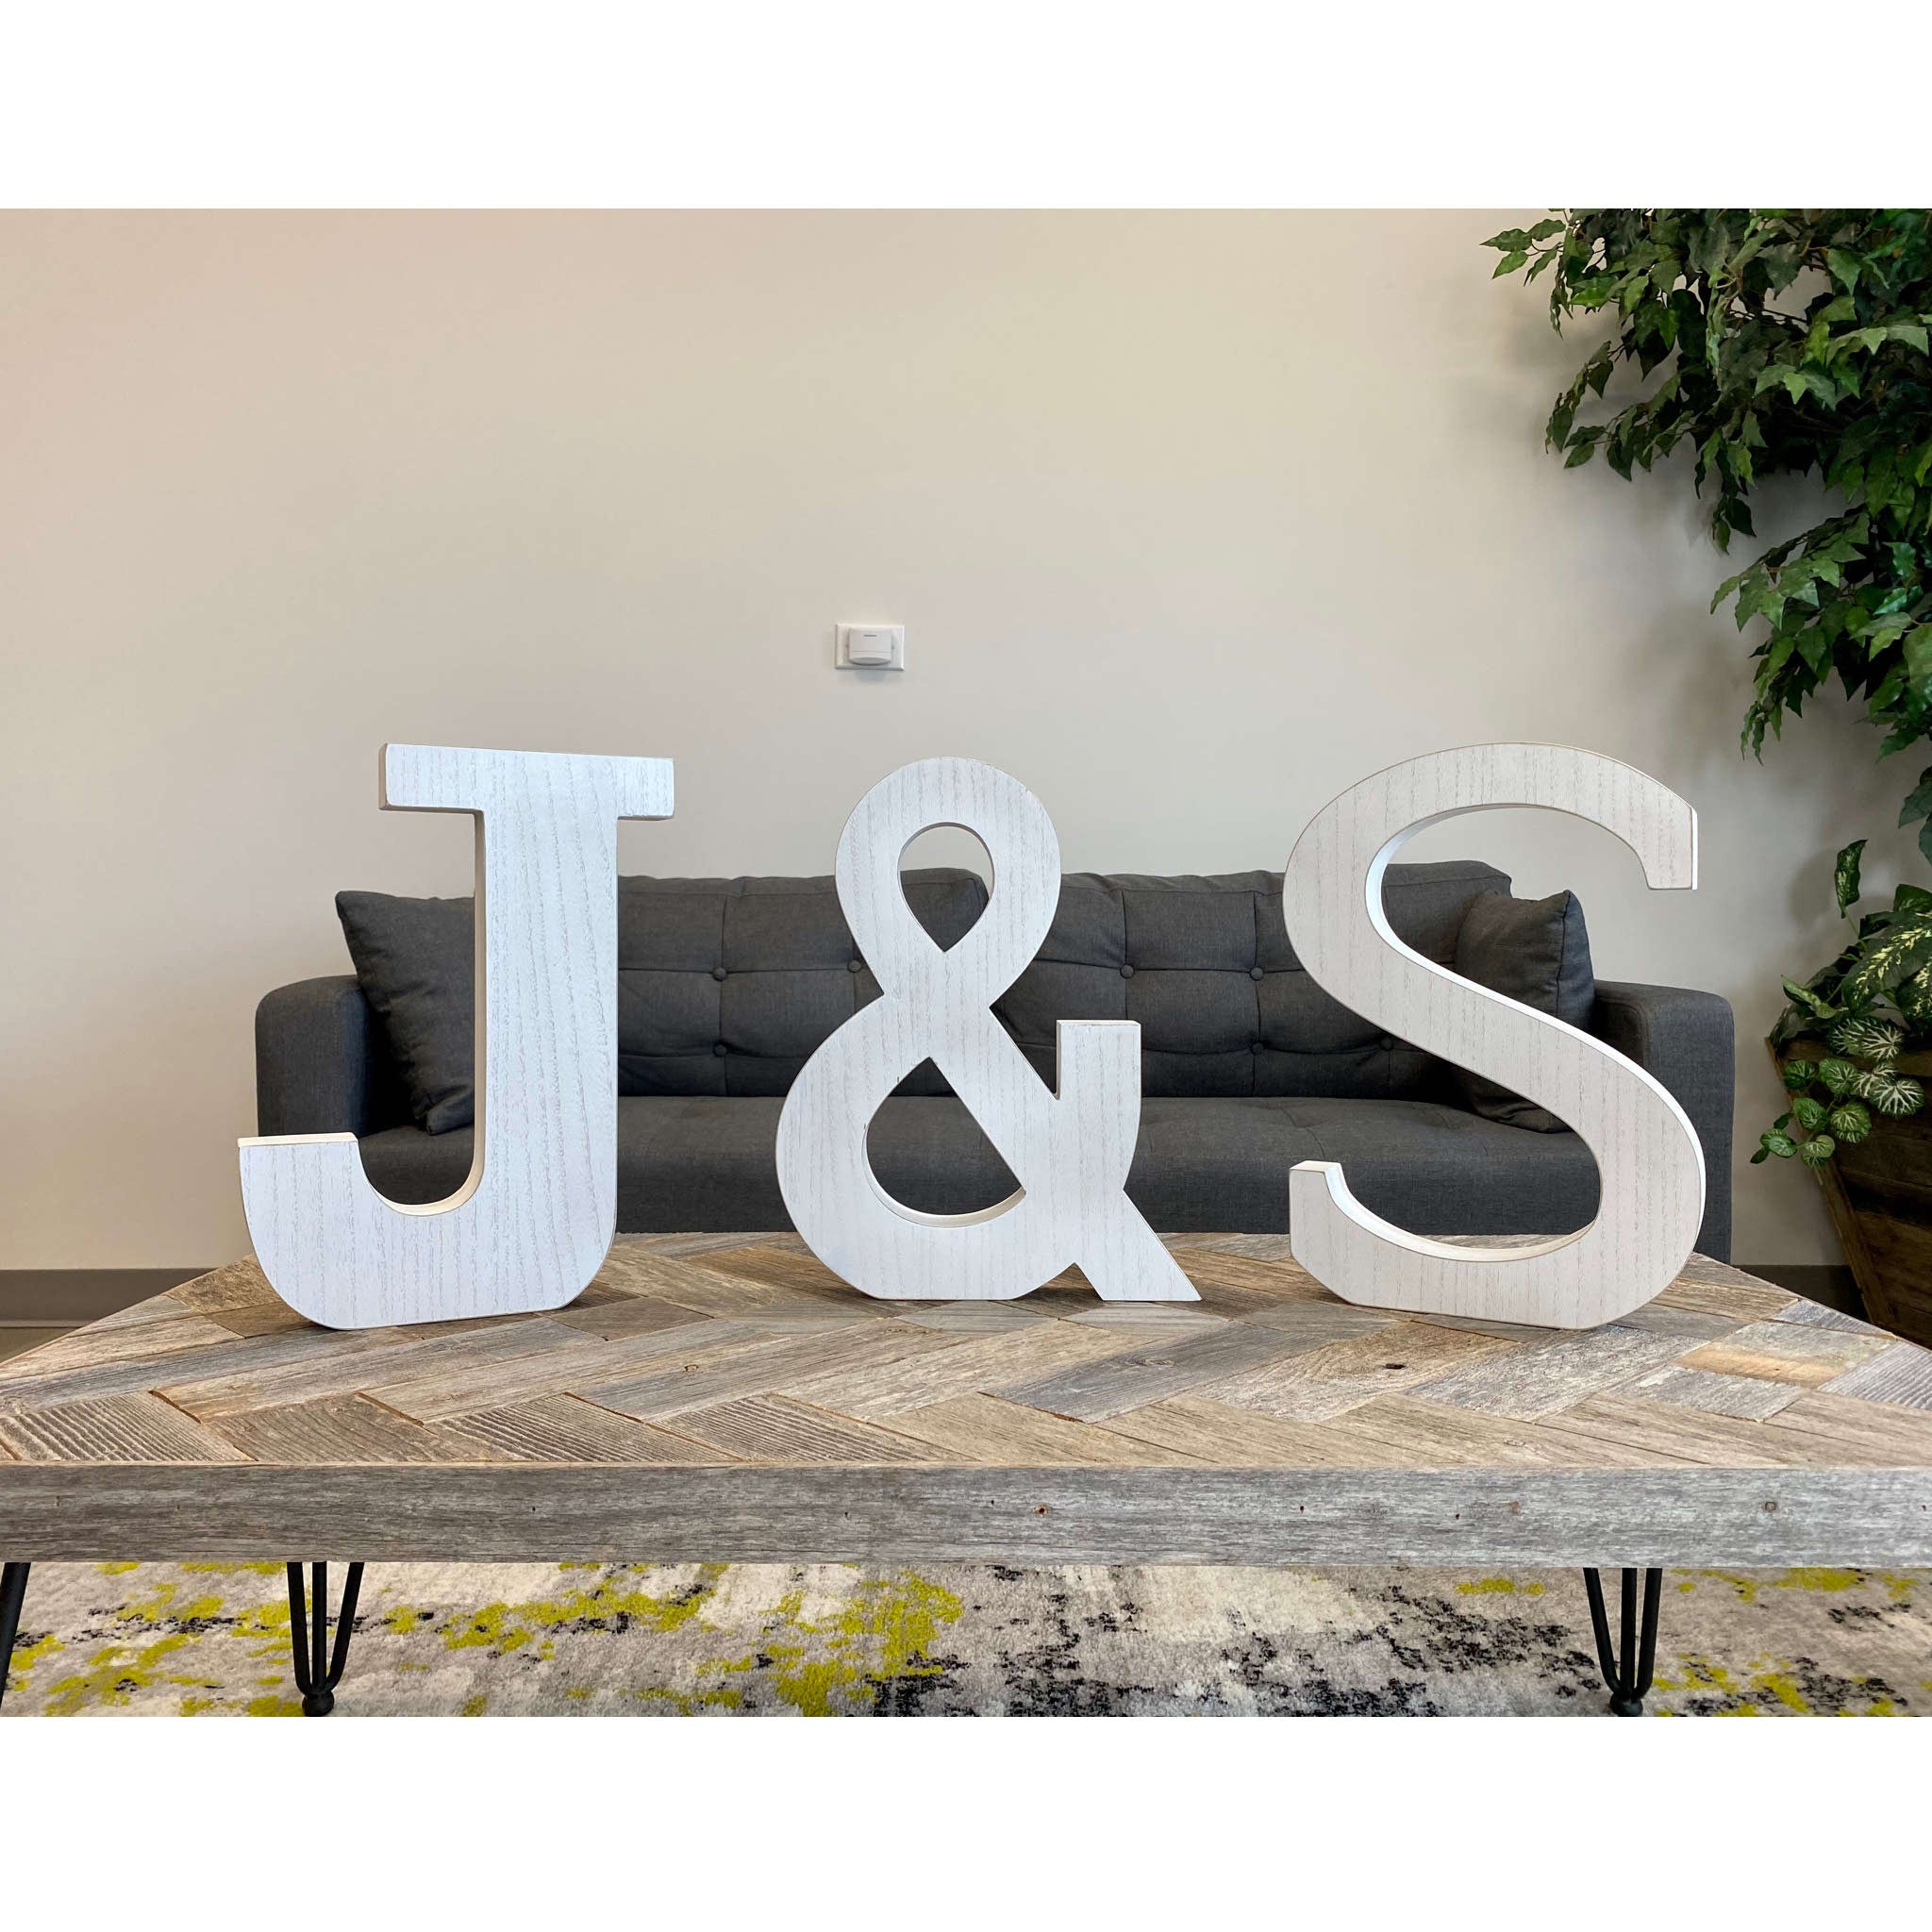 16" Distressed White Wash Wooden Initial Letter W Sculpture